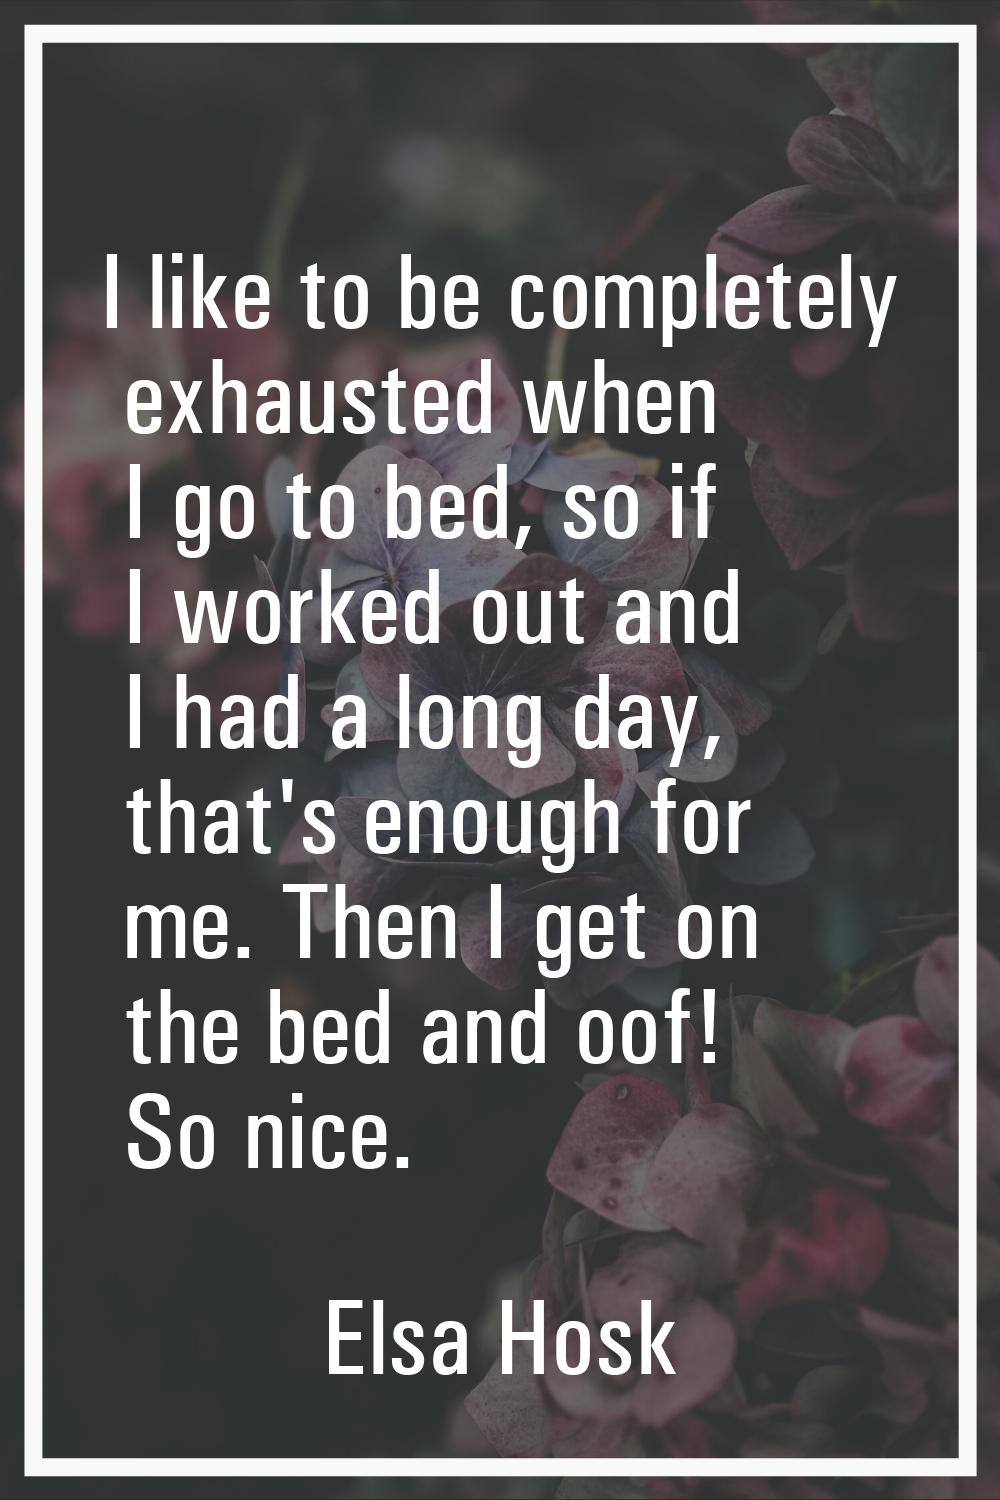 I like to be completely exhausted when I go to bed, so if I worked out and I had a long day, that's